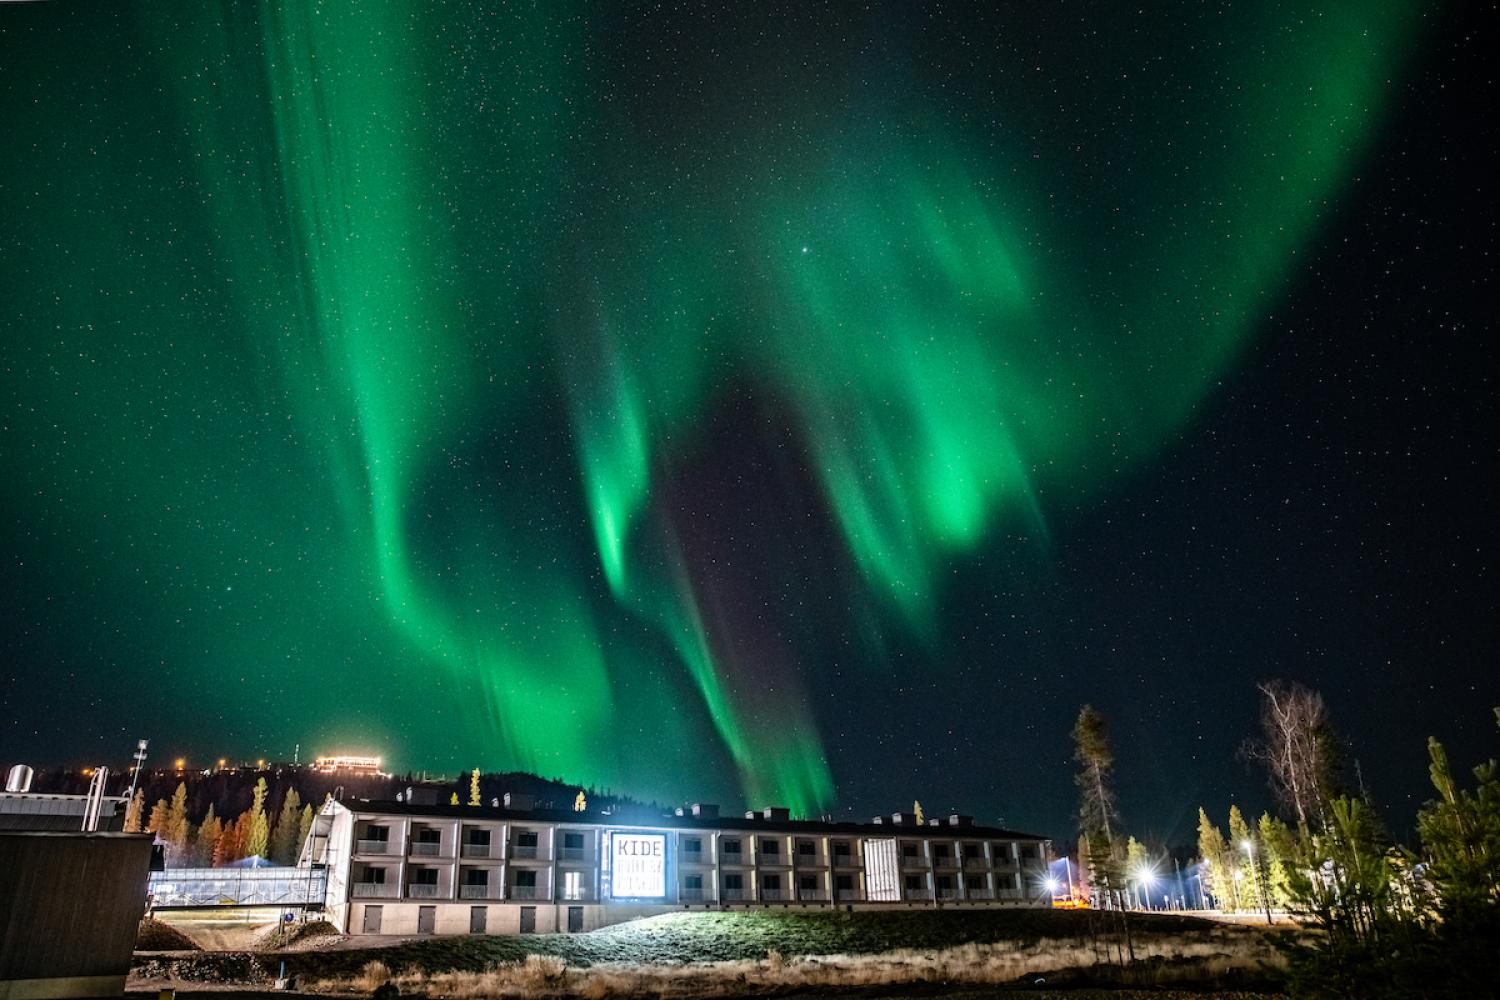 Kide Hotel and northern lights